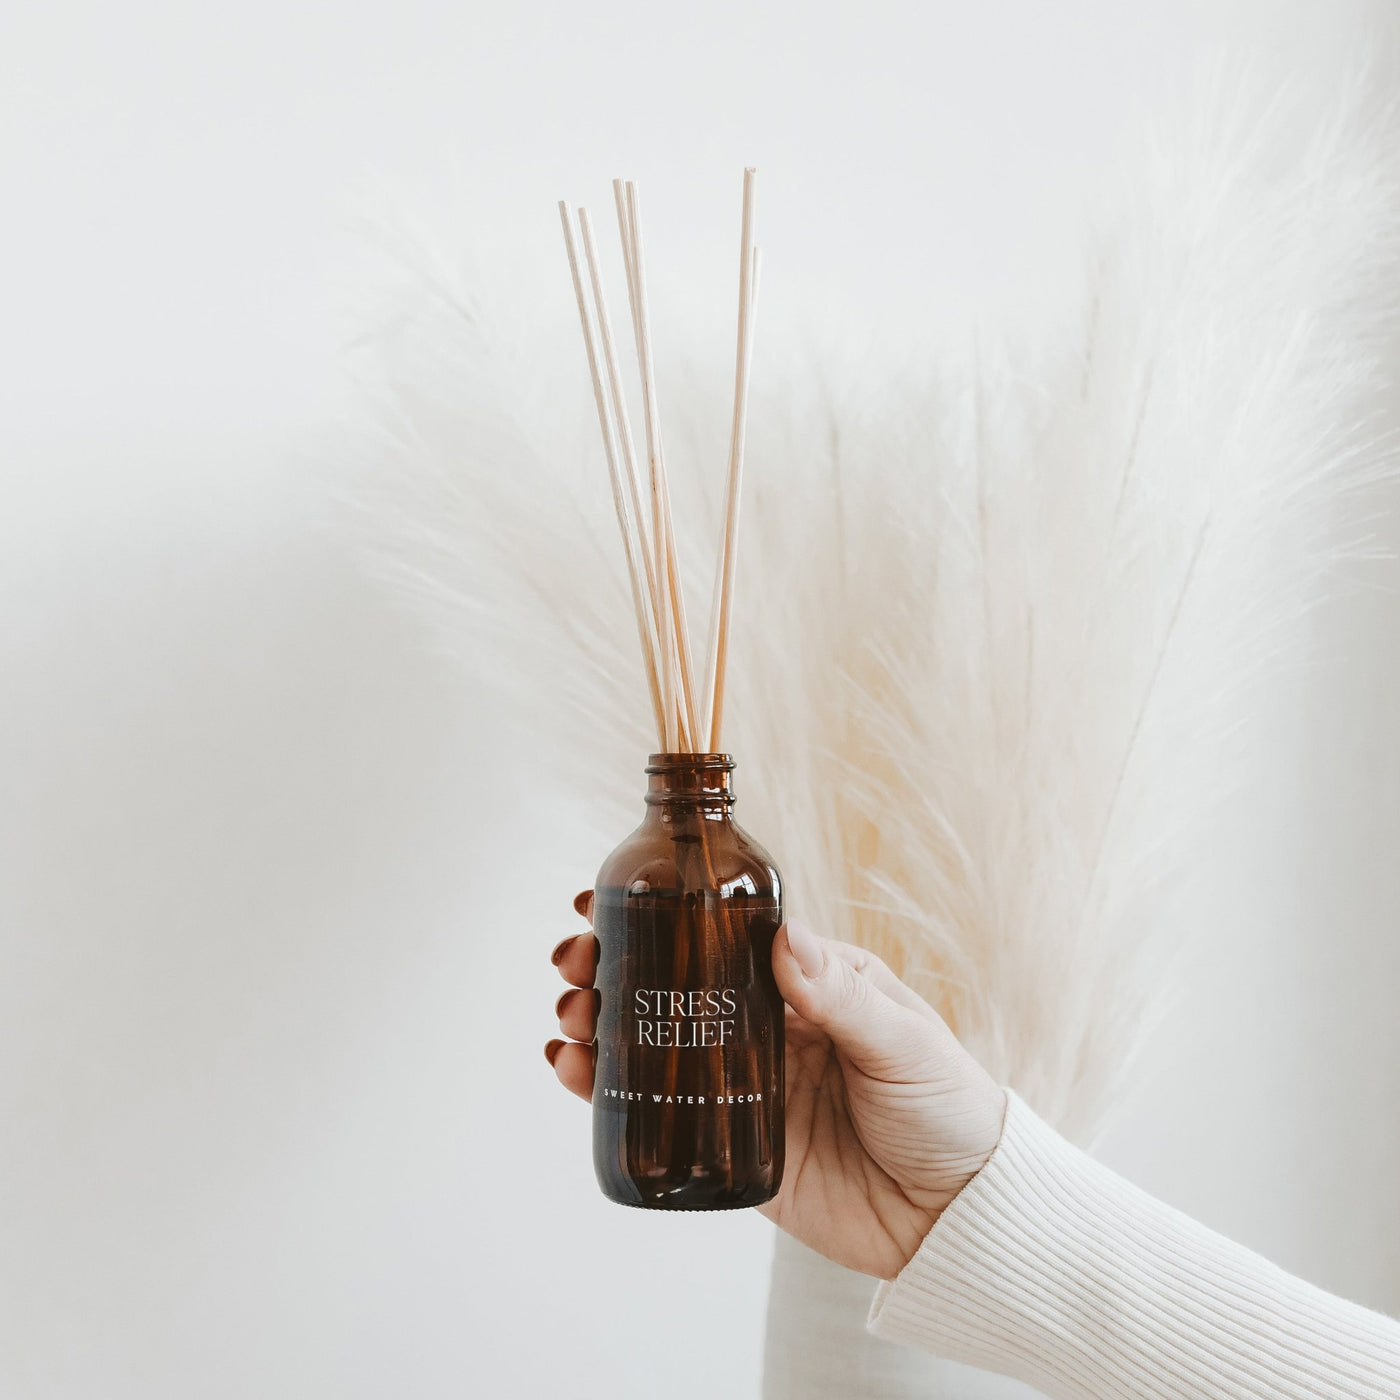 Stress Relief Amber Reed Diffuser - Sweet Water Decor - Reed Diffusers